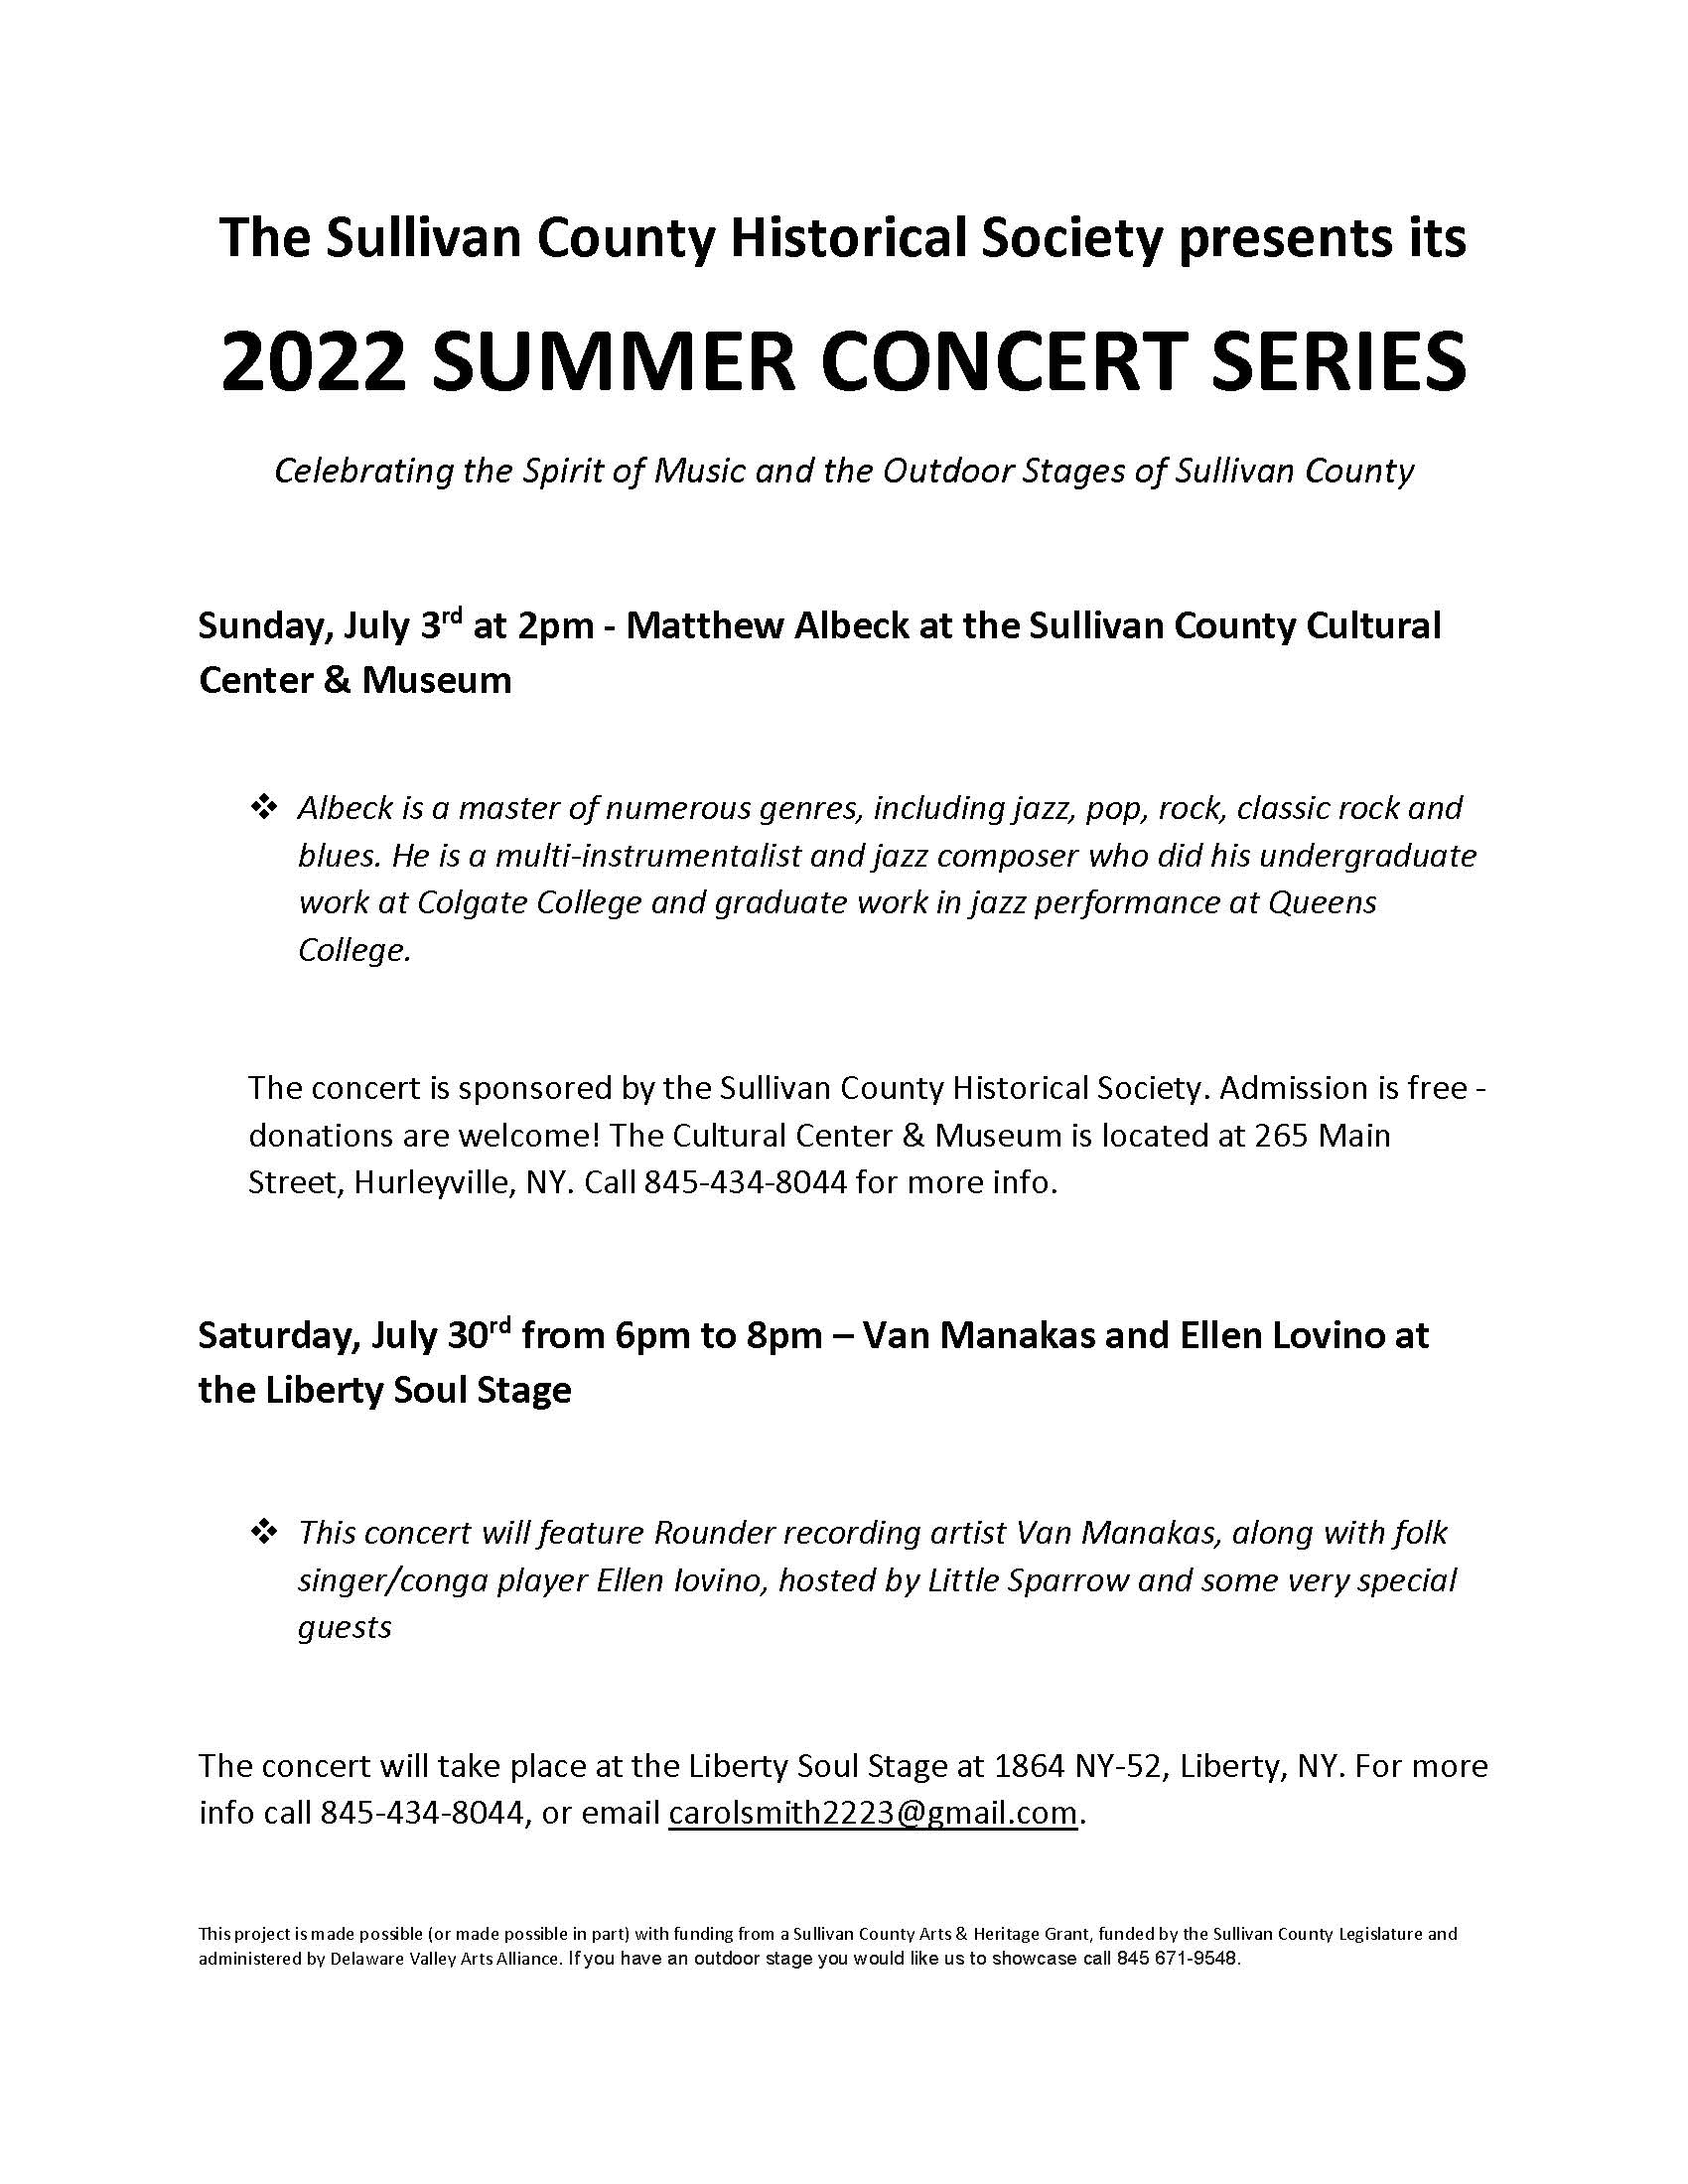 The Sullivan County Historical Society presents 2022 Summer Concert Series